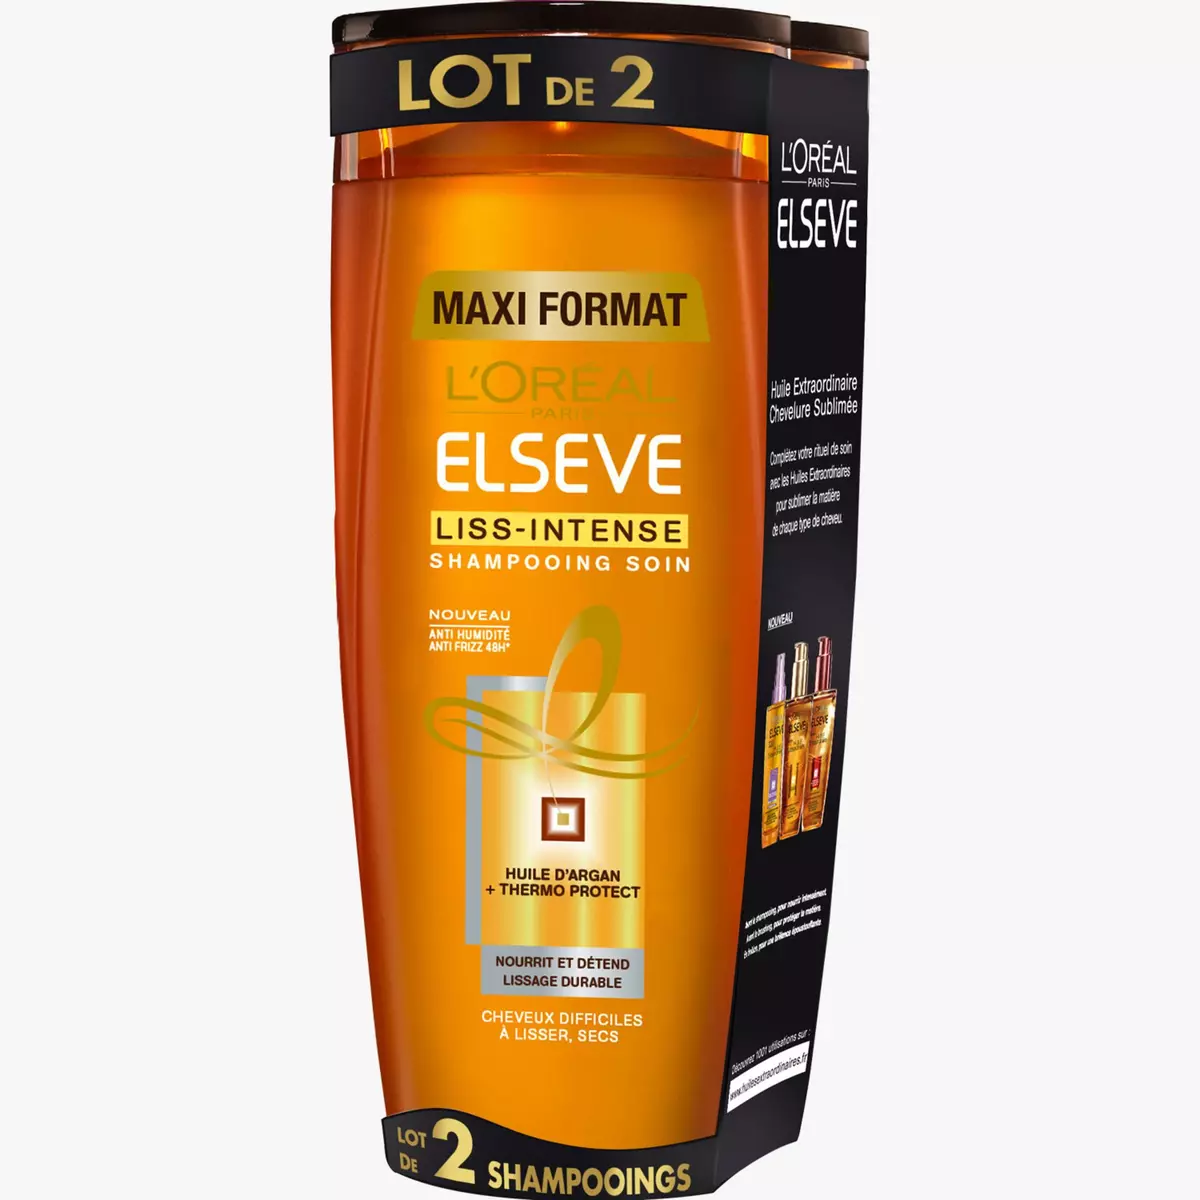 ELSEVE Liss Intense shampooing soin thermo protect argan cheveux secs 2x400ml